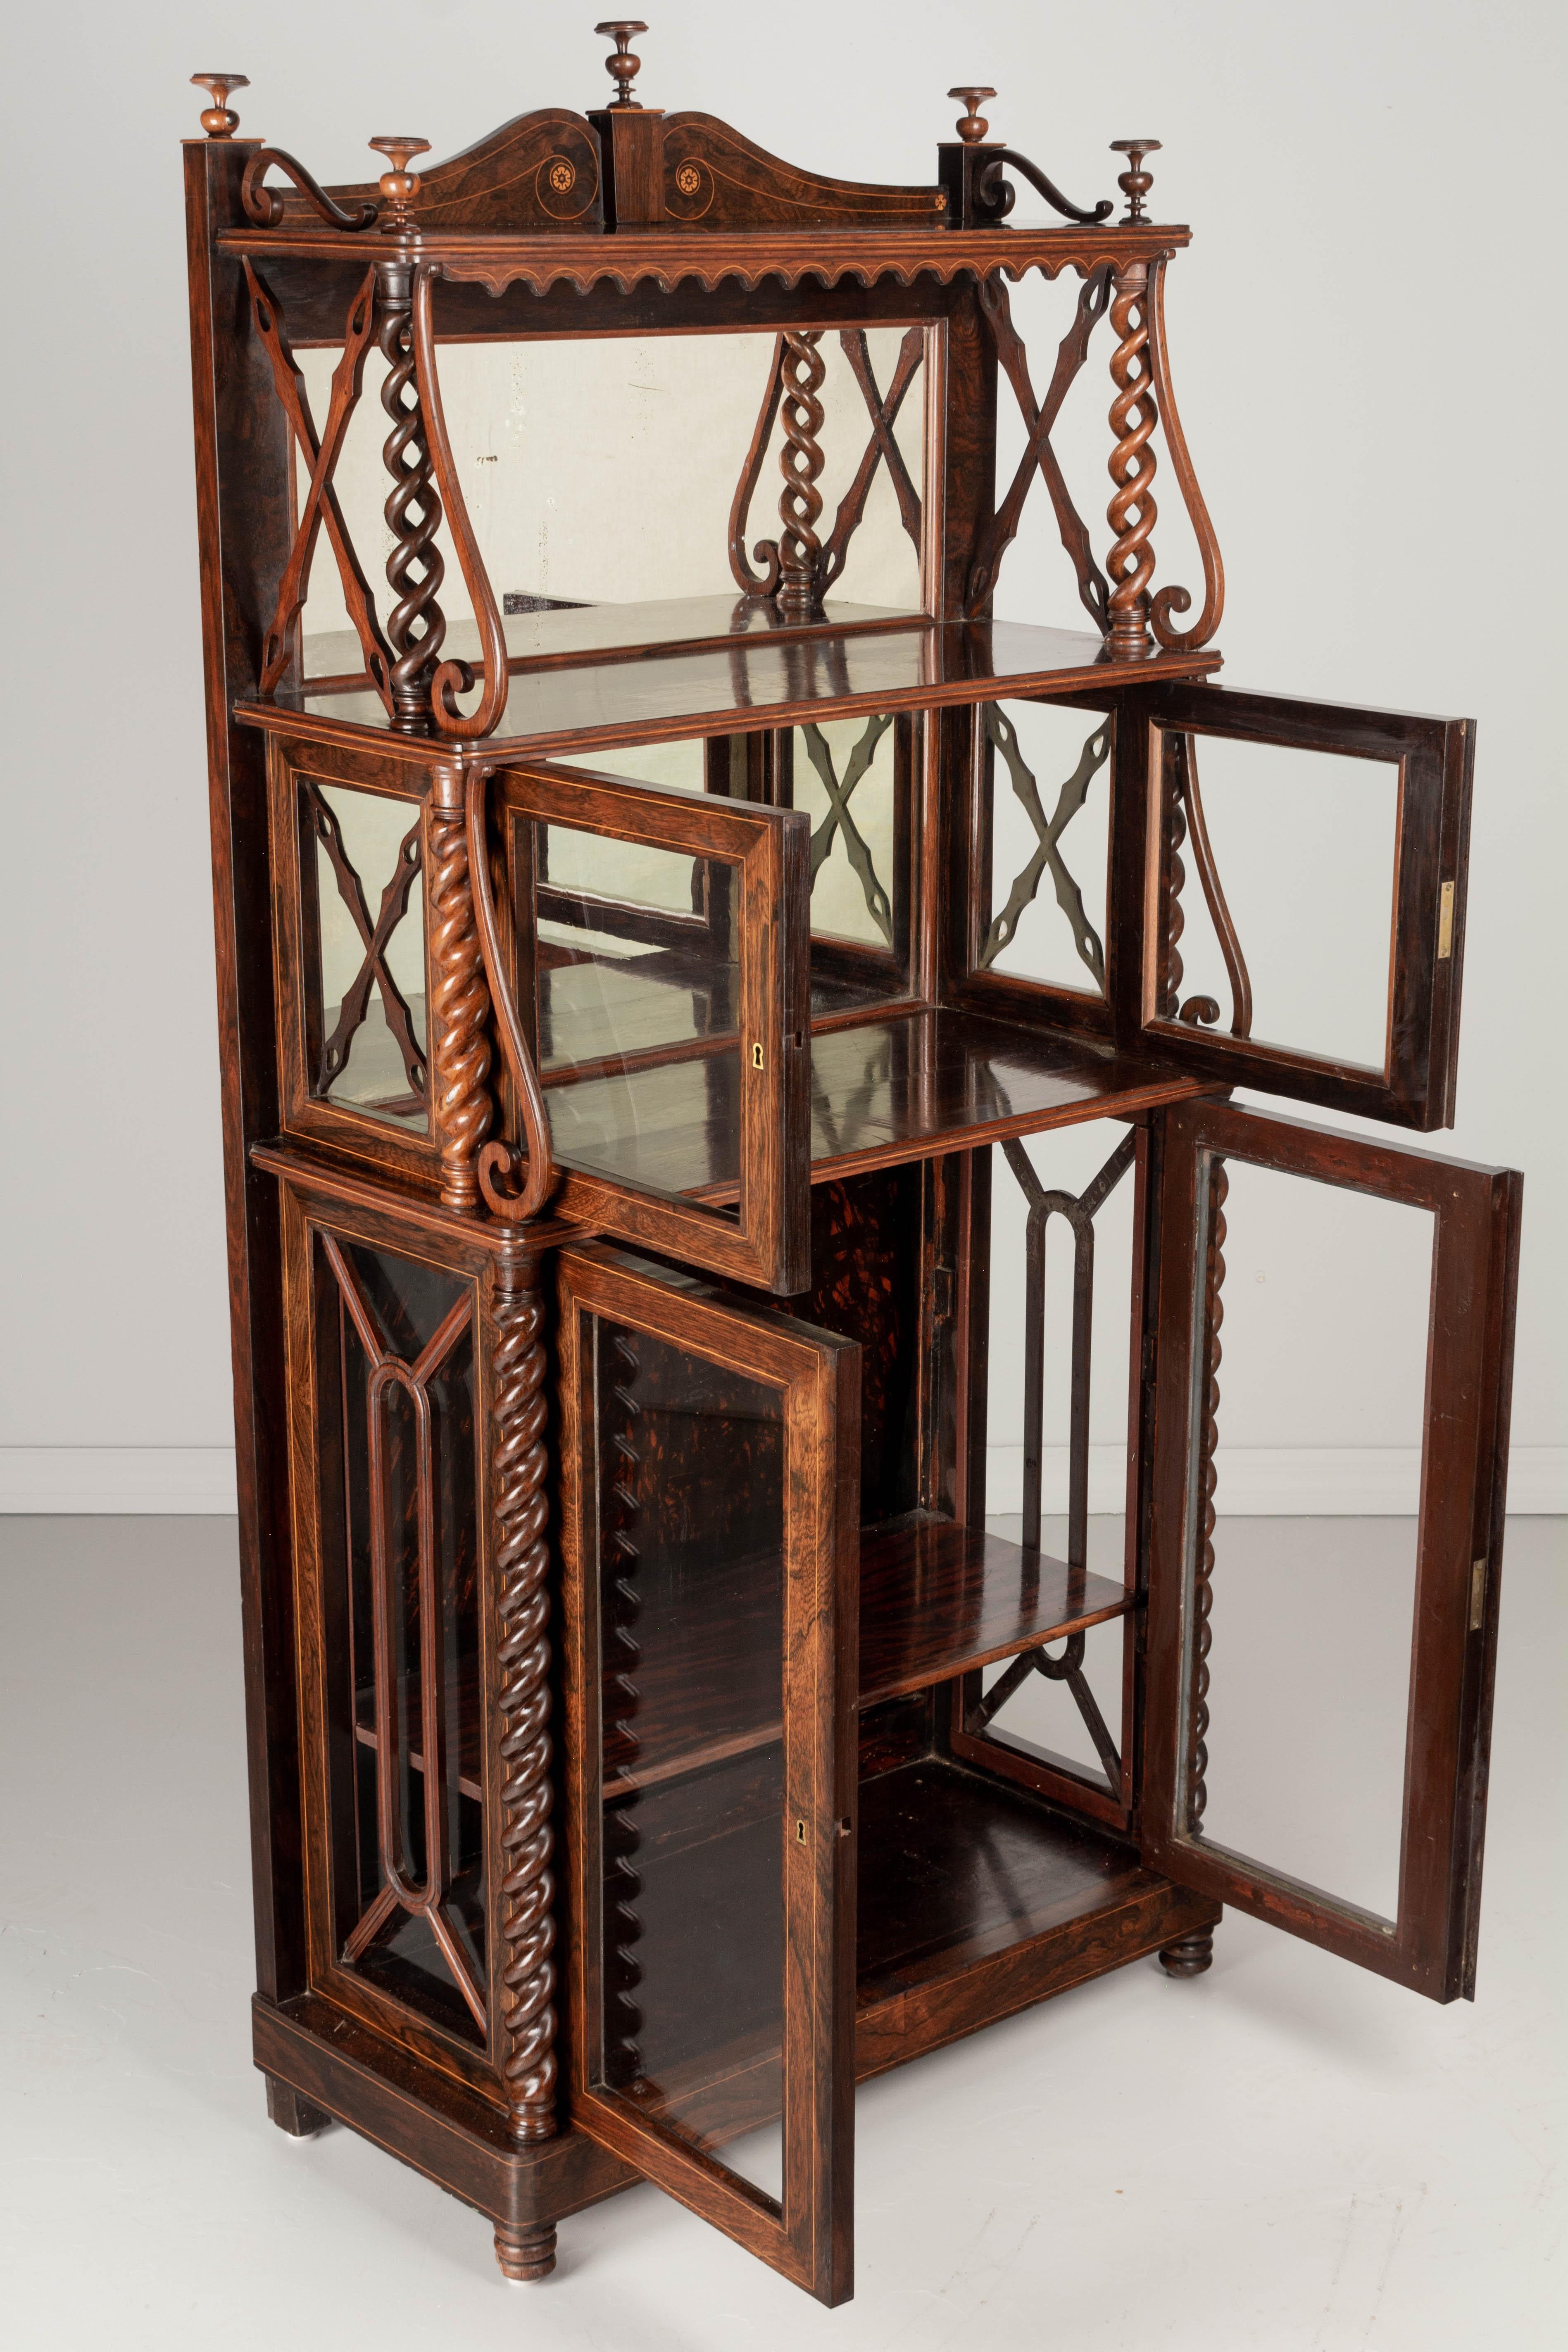 19th Century French Rosewood Etagere or Cabinet with Shelves In Good Condition For Sale In Winter Park, FL